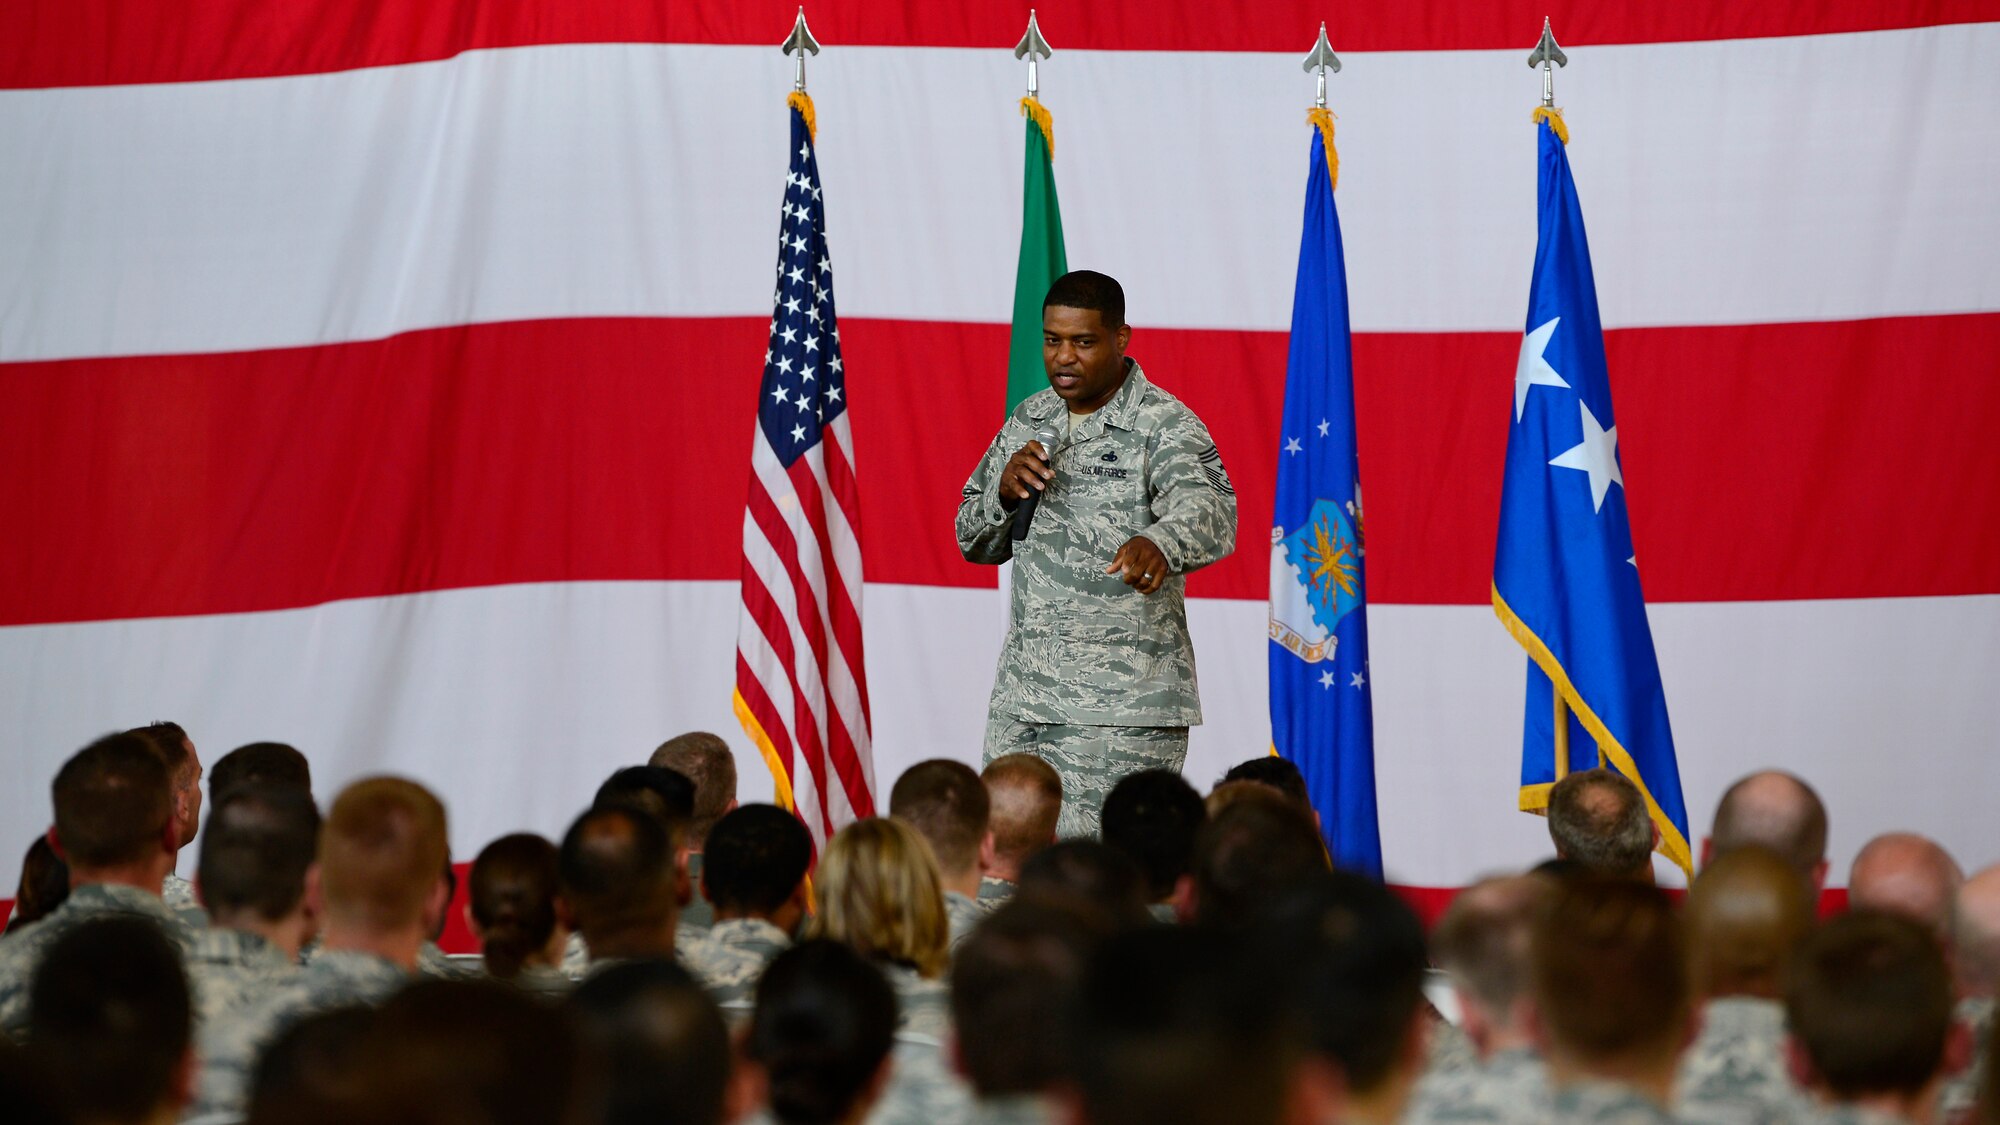 Chief Master Sgt. Phillip L. Easton, U.S. Air Forces in Europe and Air Forces Africa command chief, speaks with Airmen at an all call during a visit to Aviano Air Base, Italy, July 23, 2018. Easton spoke on the importance of Airmen and families to take time to recharge and come back to complete the mission safely and efficiently. (U.S. Air Force photo by Staff Sgt. Cary Smith)